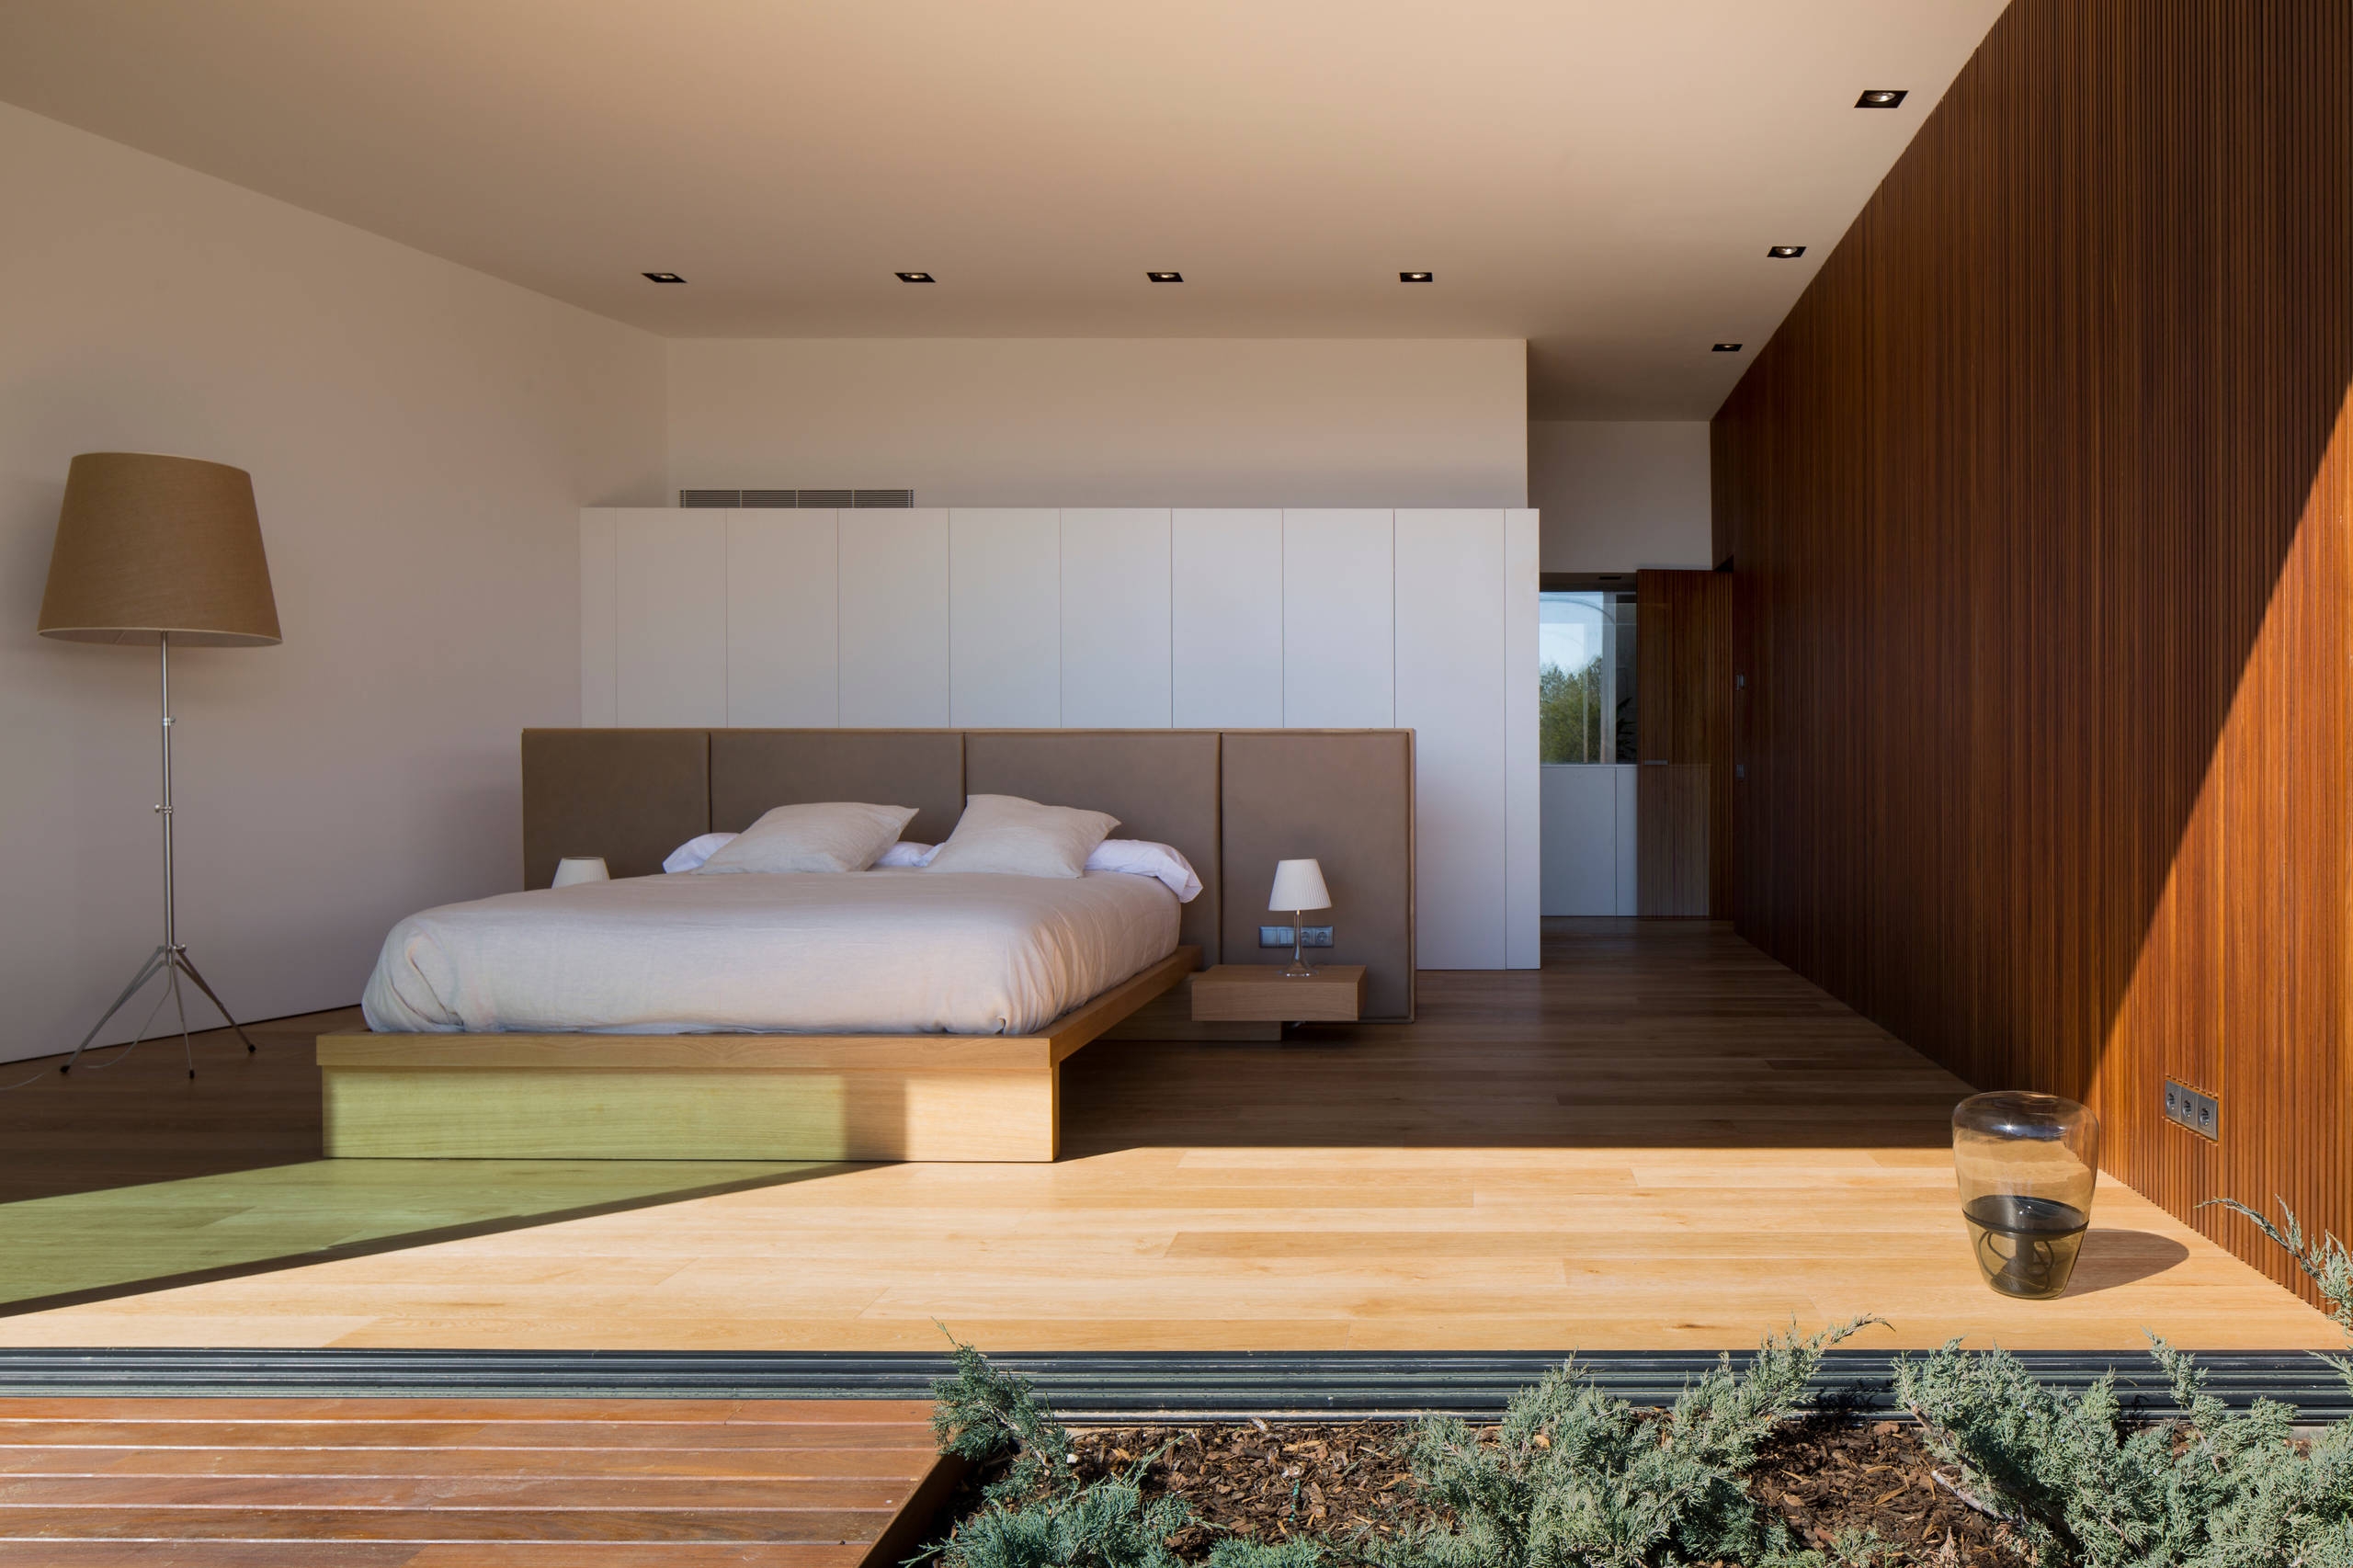 Spacious Japandi bedroom with wooden elements